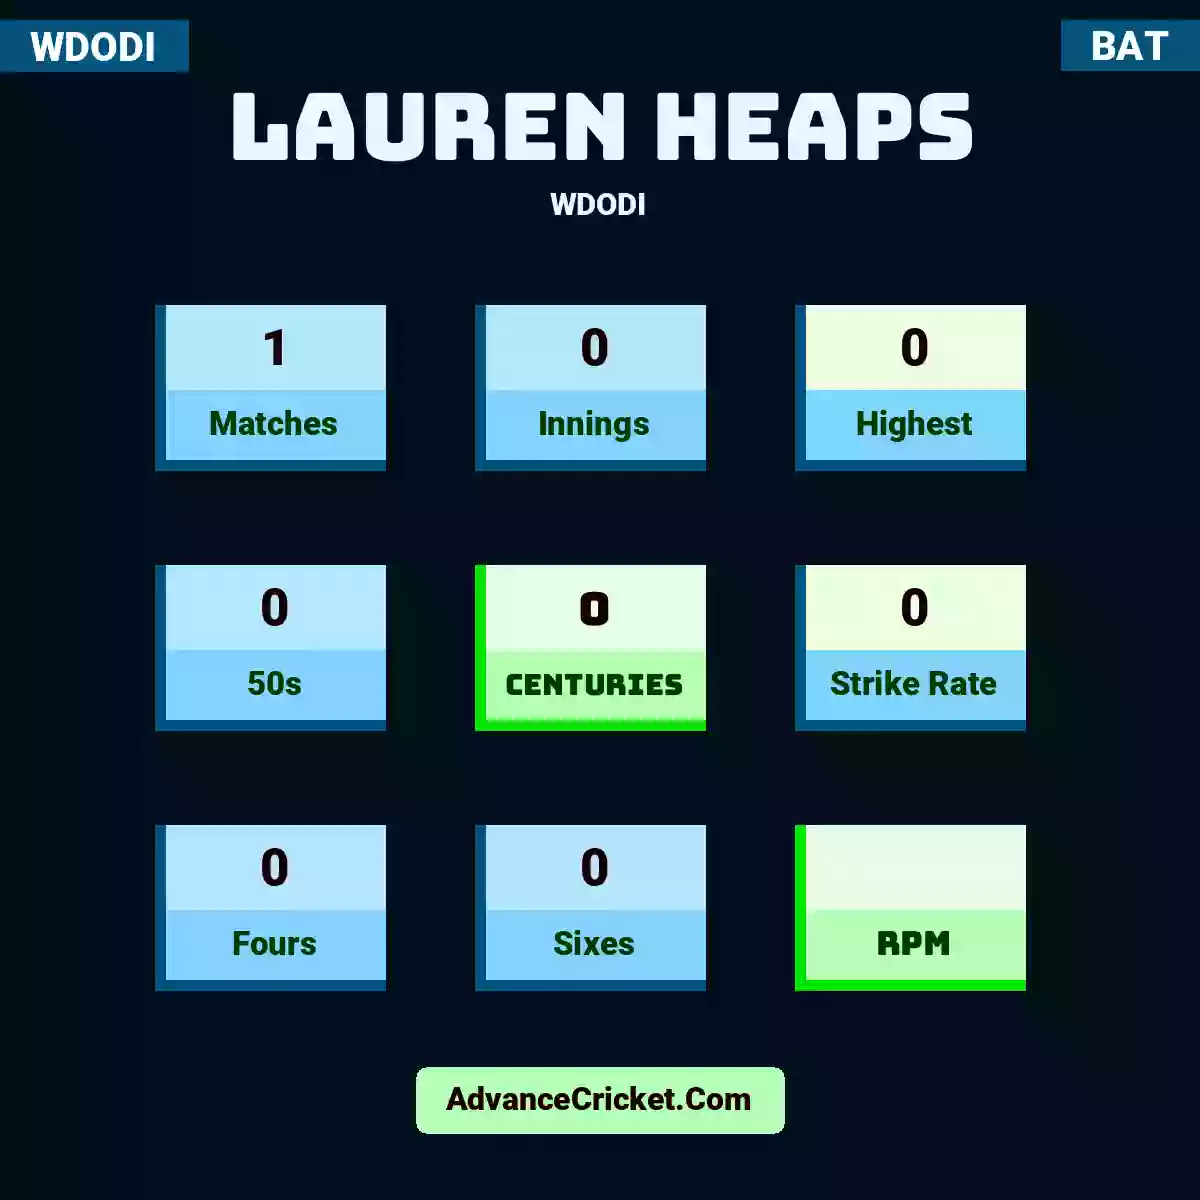 Lauren heaps WDODI , Lauren heaps played 1 matches, scored 0 runs as highest, 0 half-centuries, and 0 centuries, with a strike rate of 0. L.heaps hit 0 fours and 0 sixes.